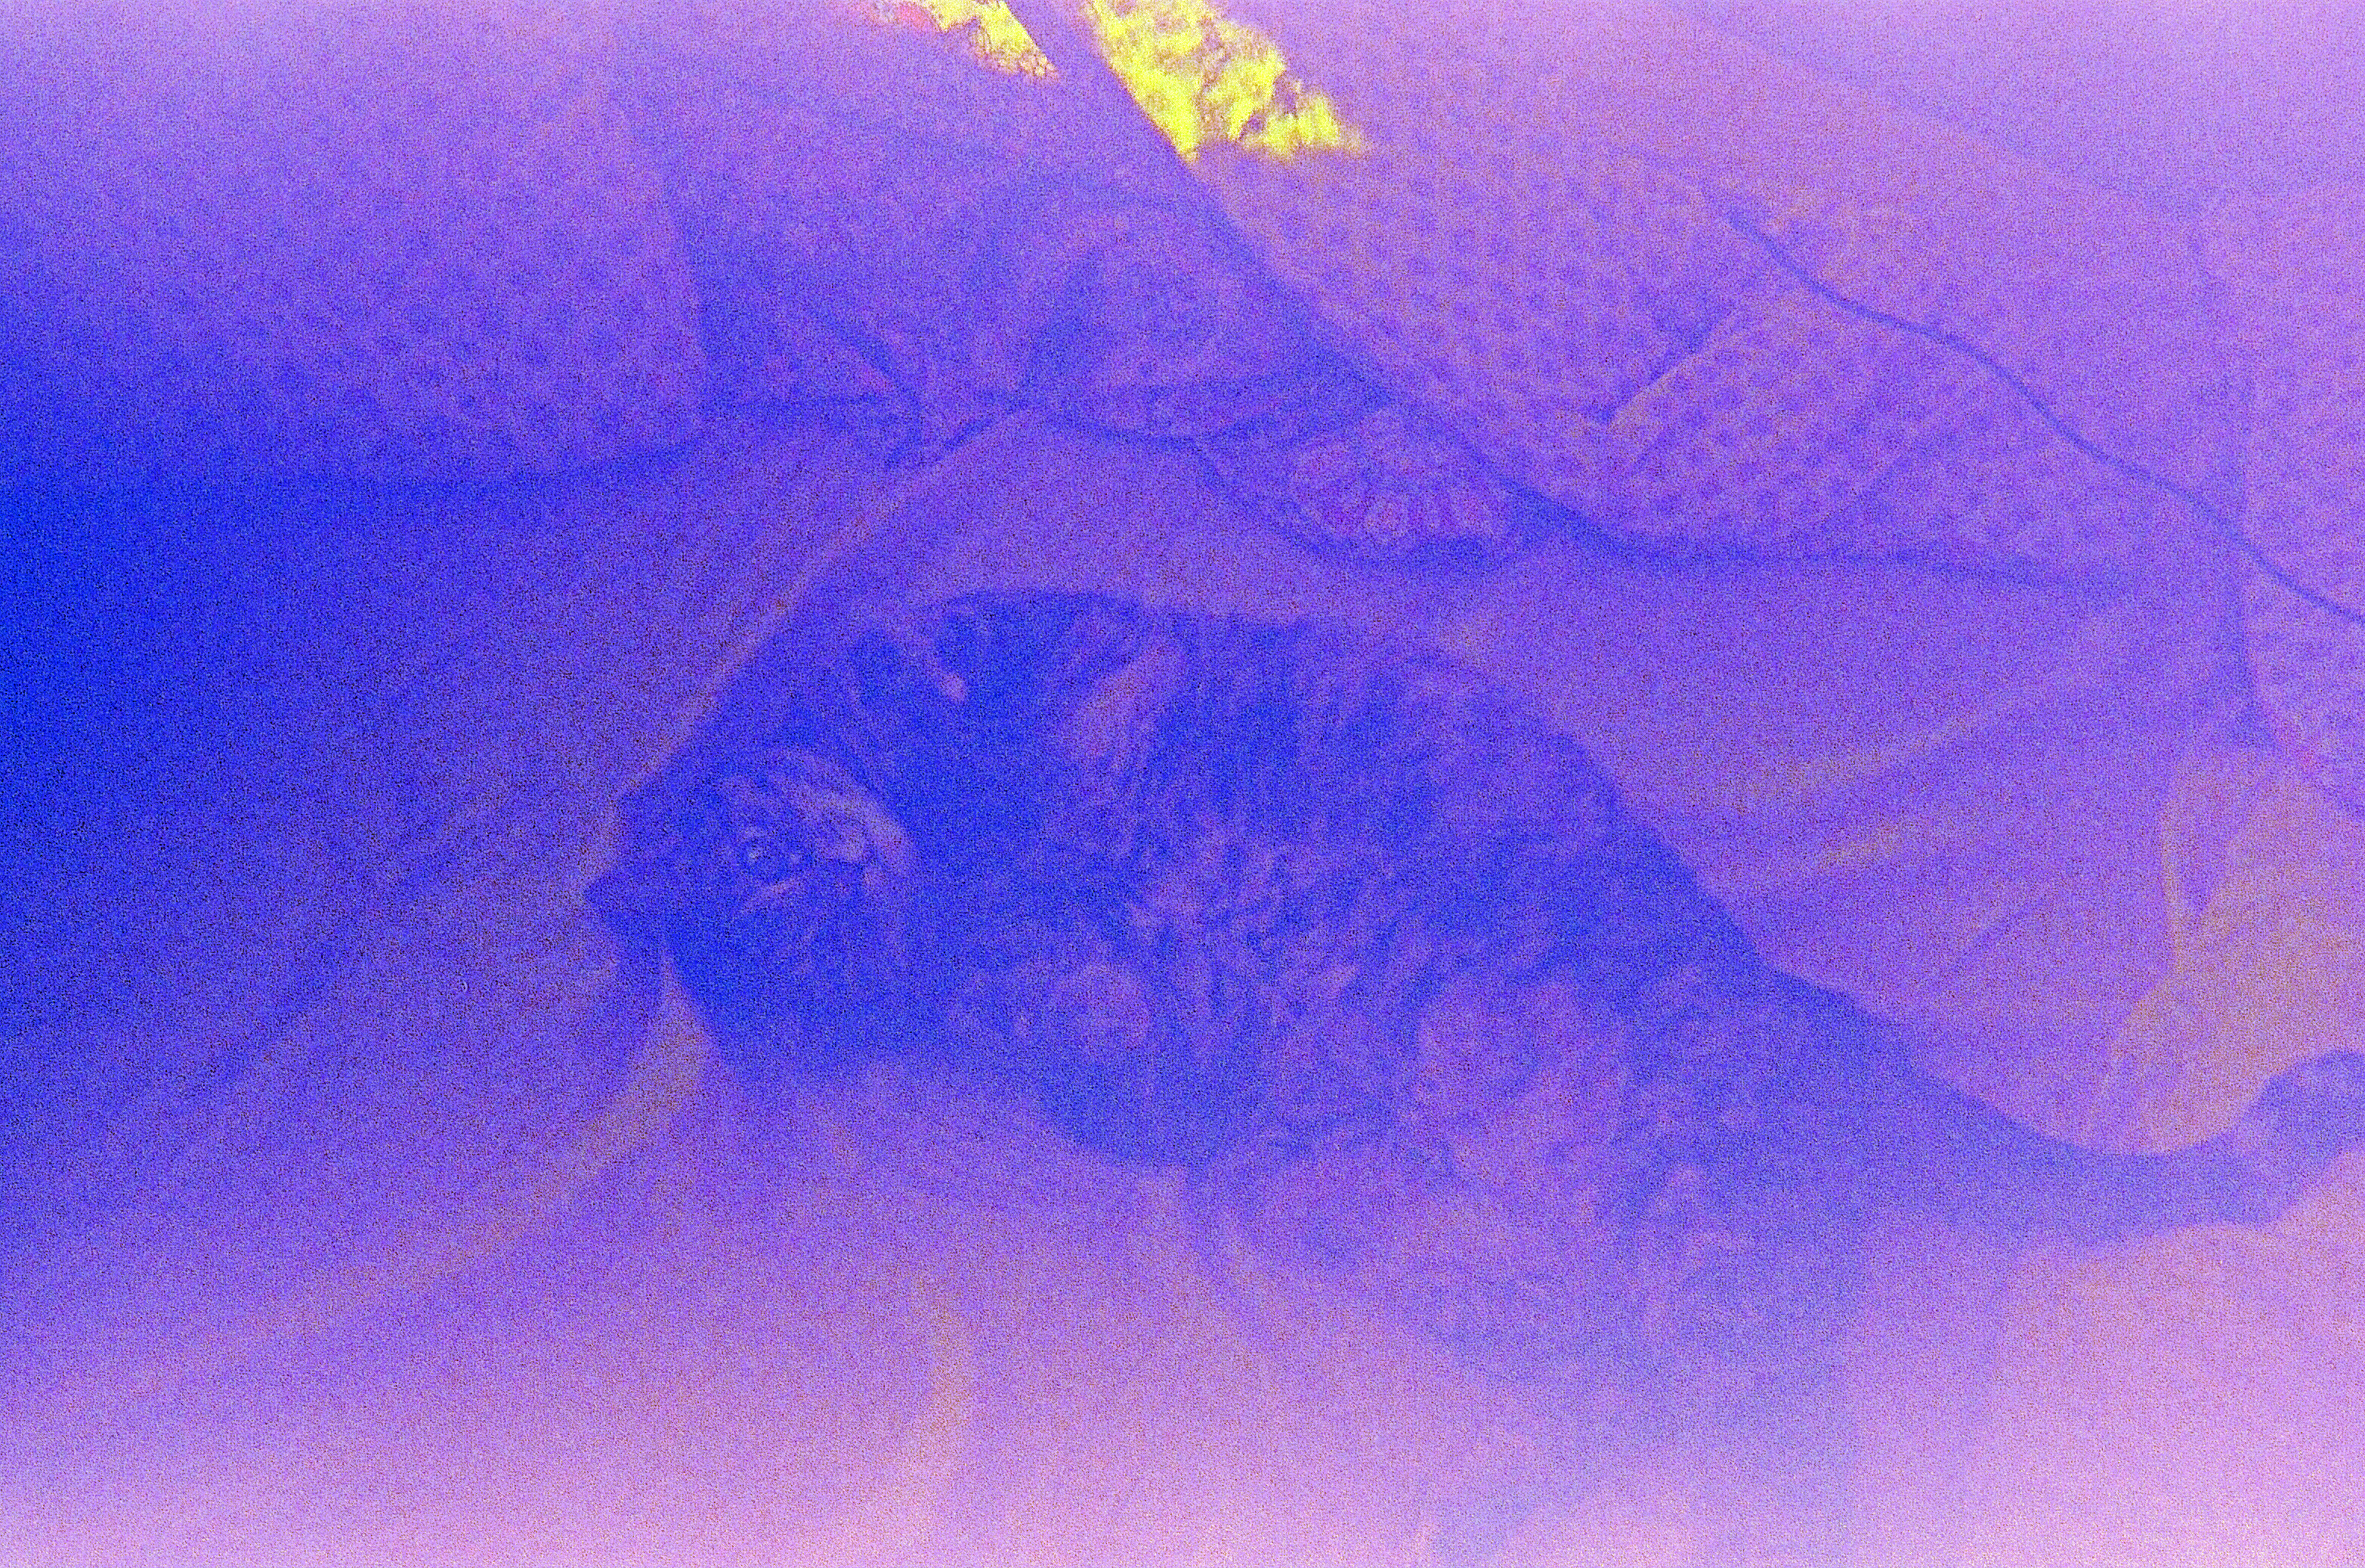 Foggy, purple-hued picture of a fat tabby laying on a bed displaying its stomach.